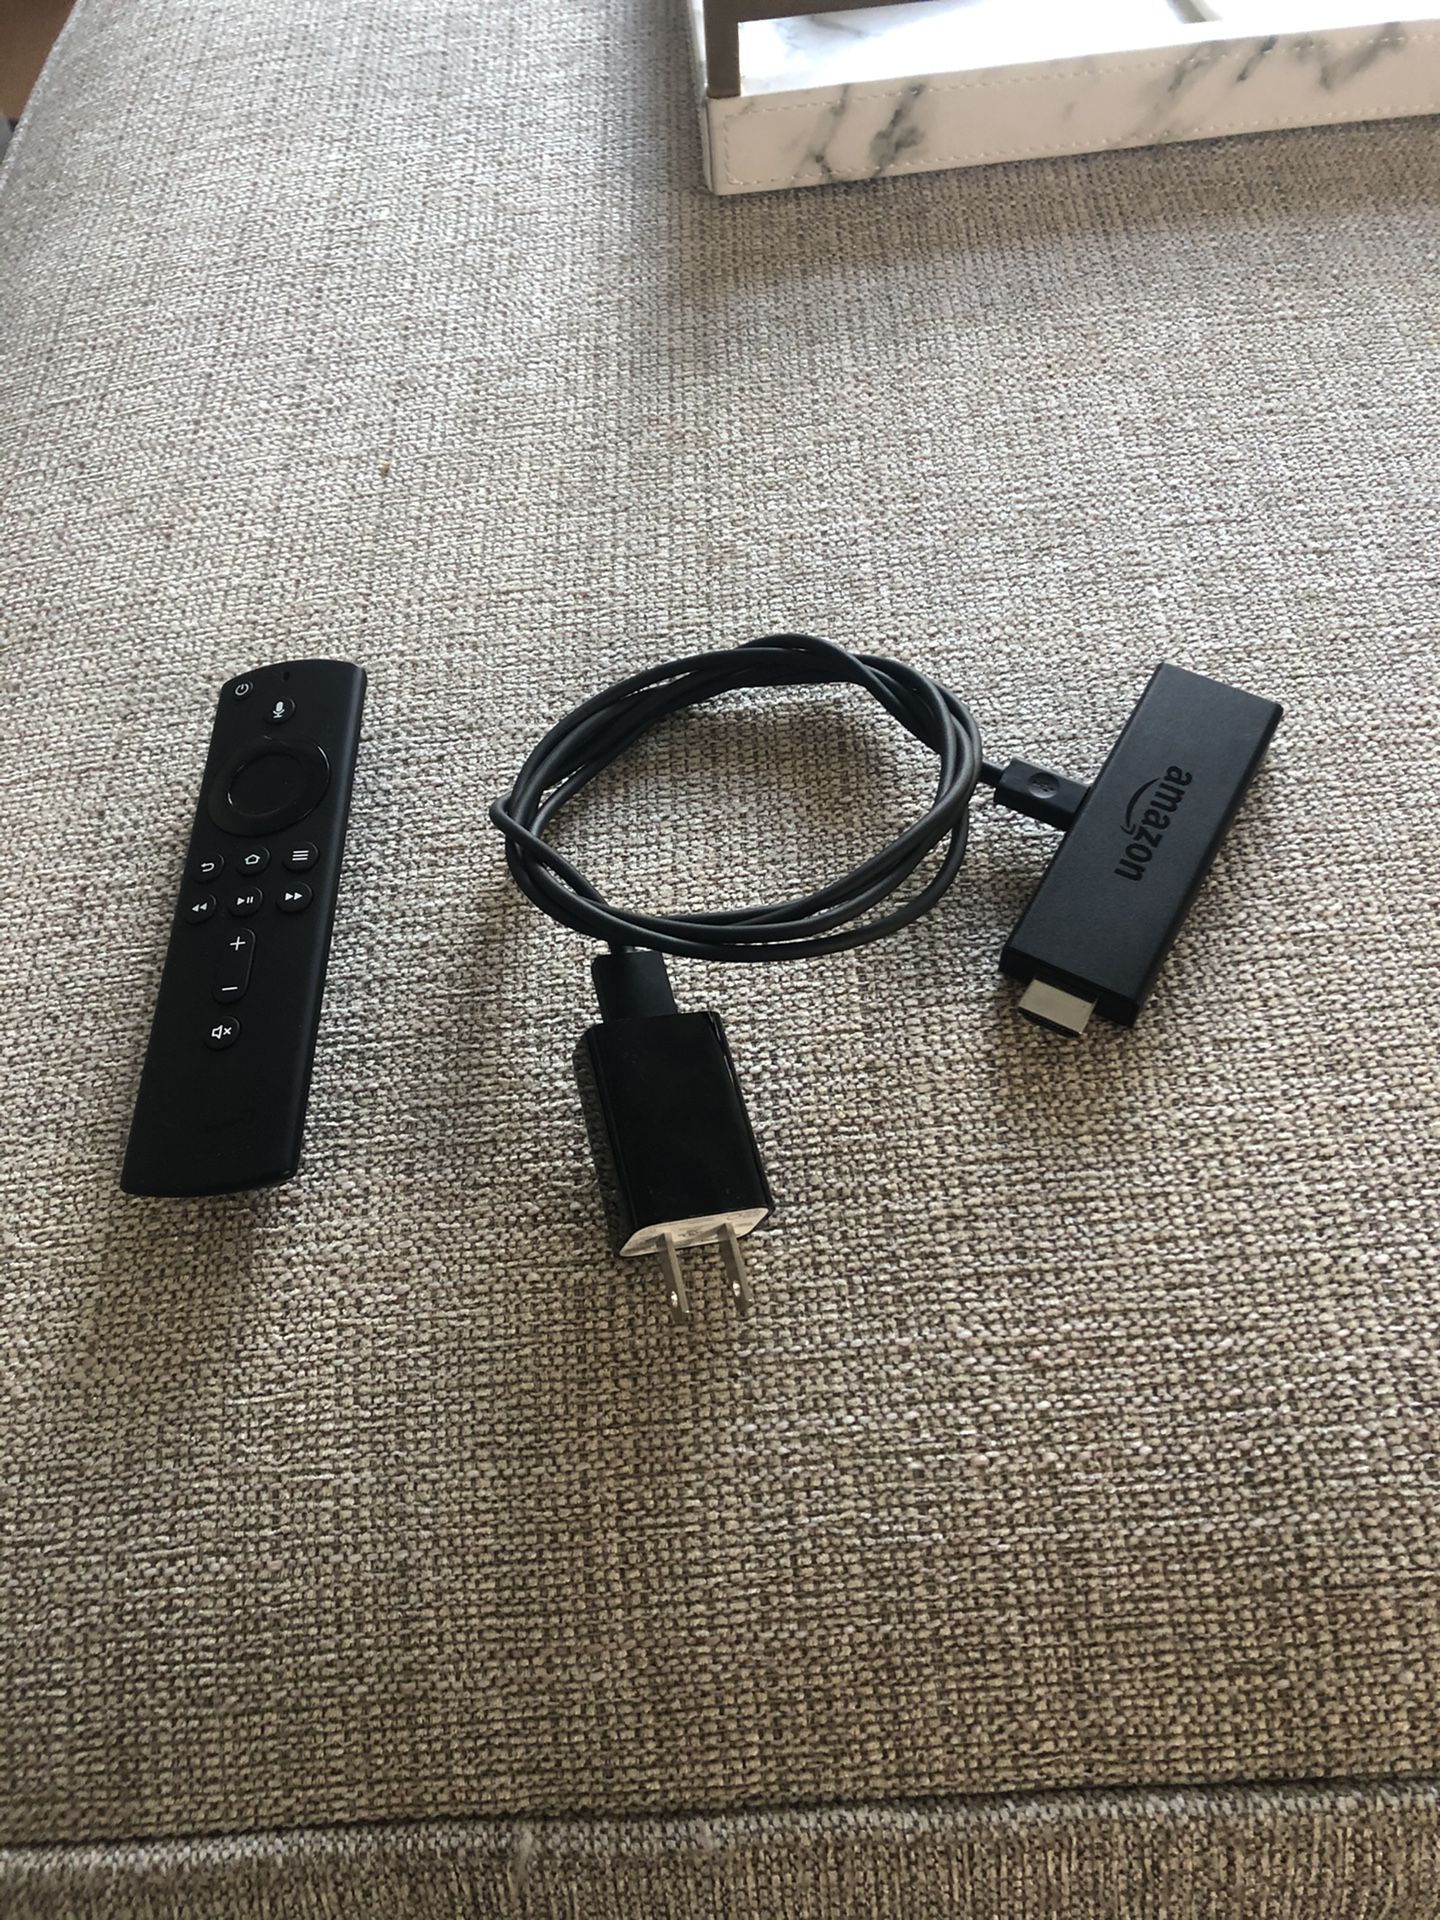 Amazon Fire TV Stick available!